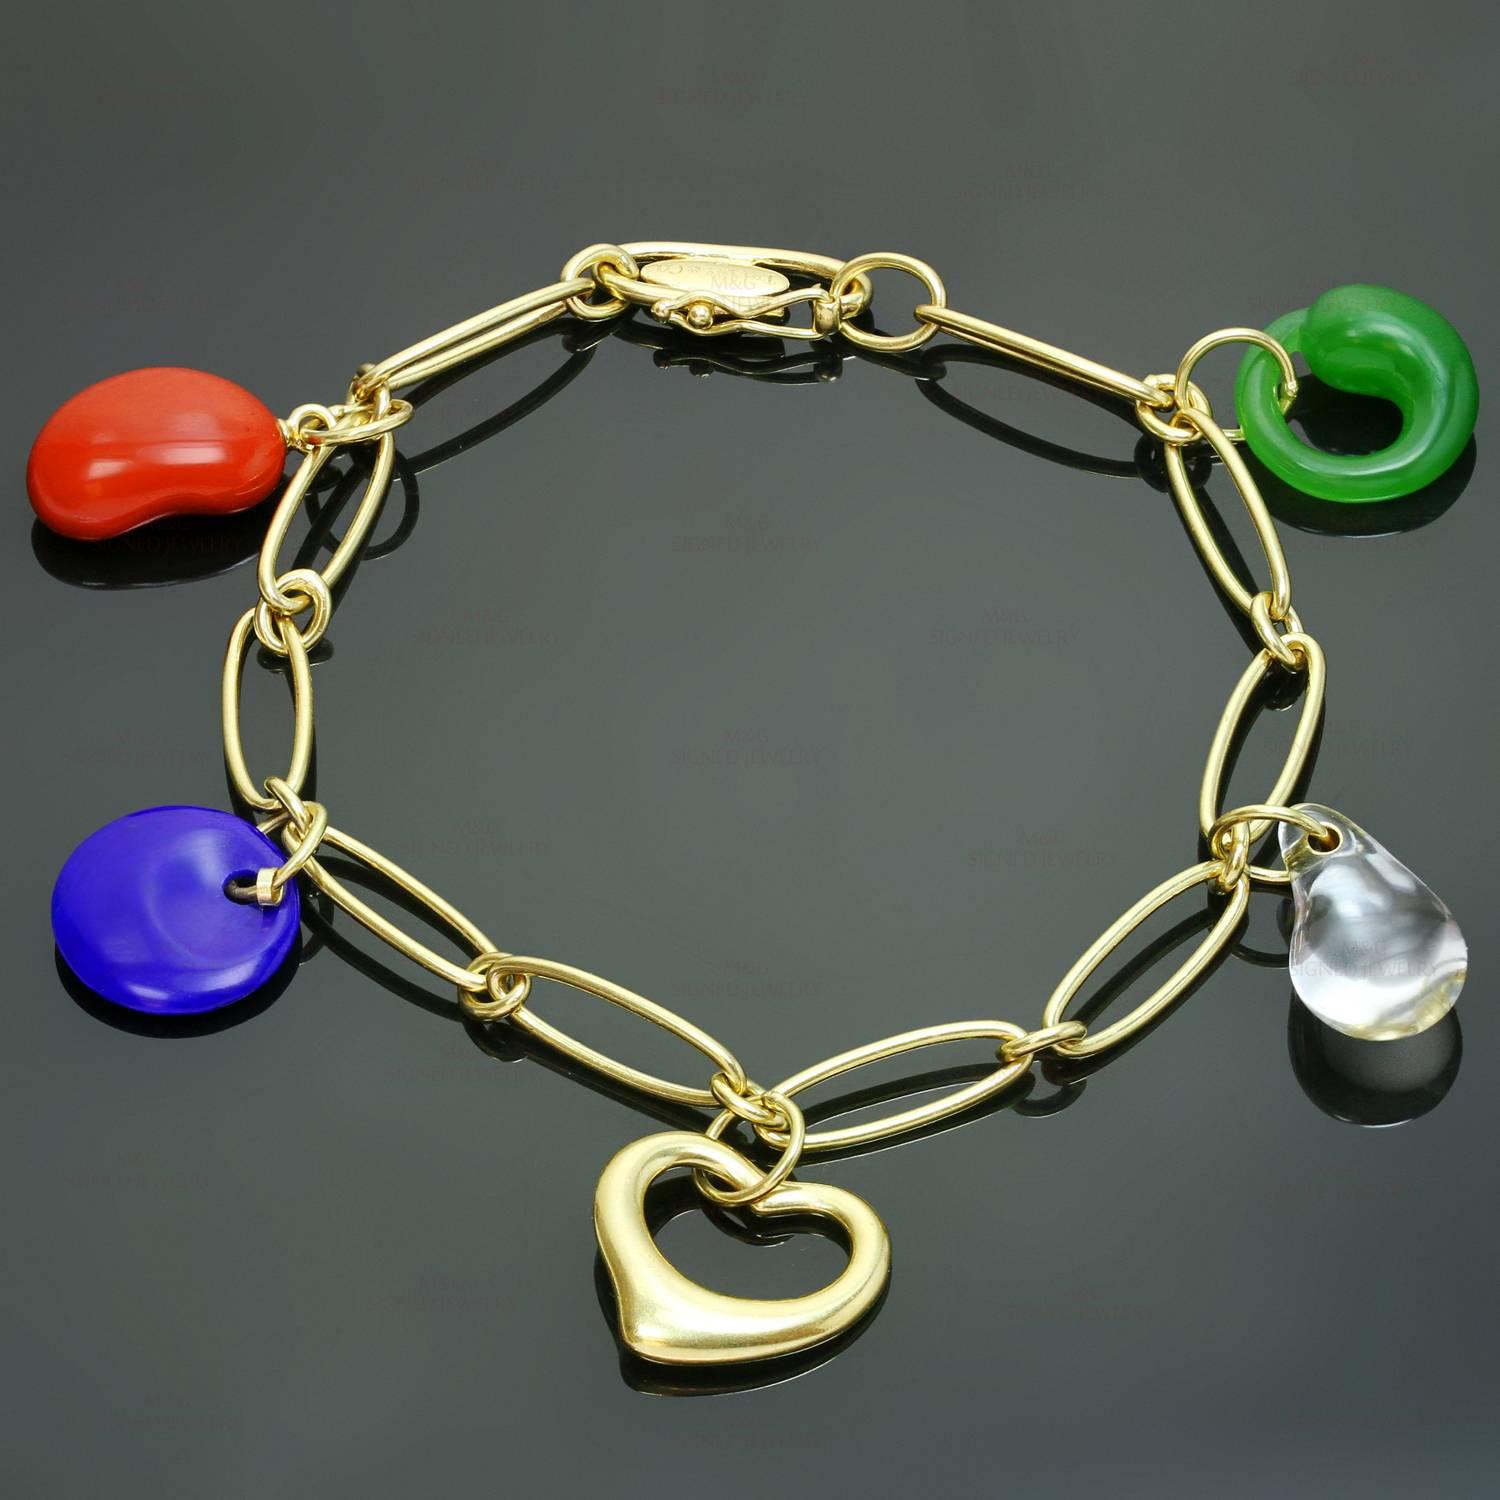 This vibrant Tiffany bracelet from the Cat Island Beach Shell designed by Elsa Peretti is crafted in 18k yellow gold bracelet and accented with green jade, blue lapis, red jasper, crystal, and a heart-shaped charm. The vibrant charms resemble the